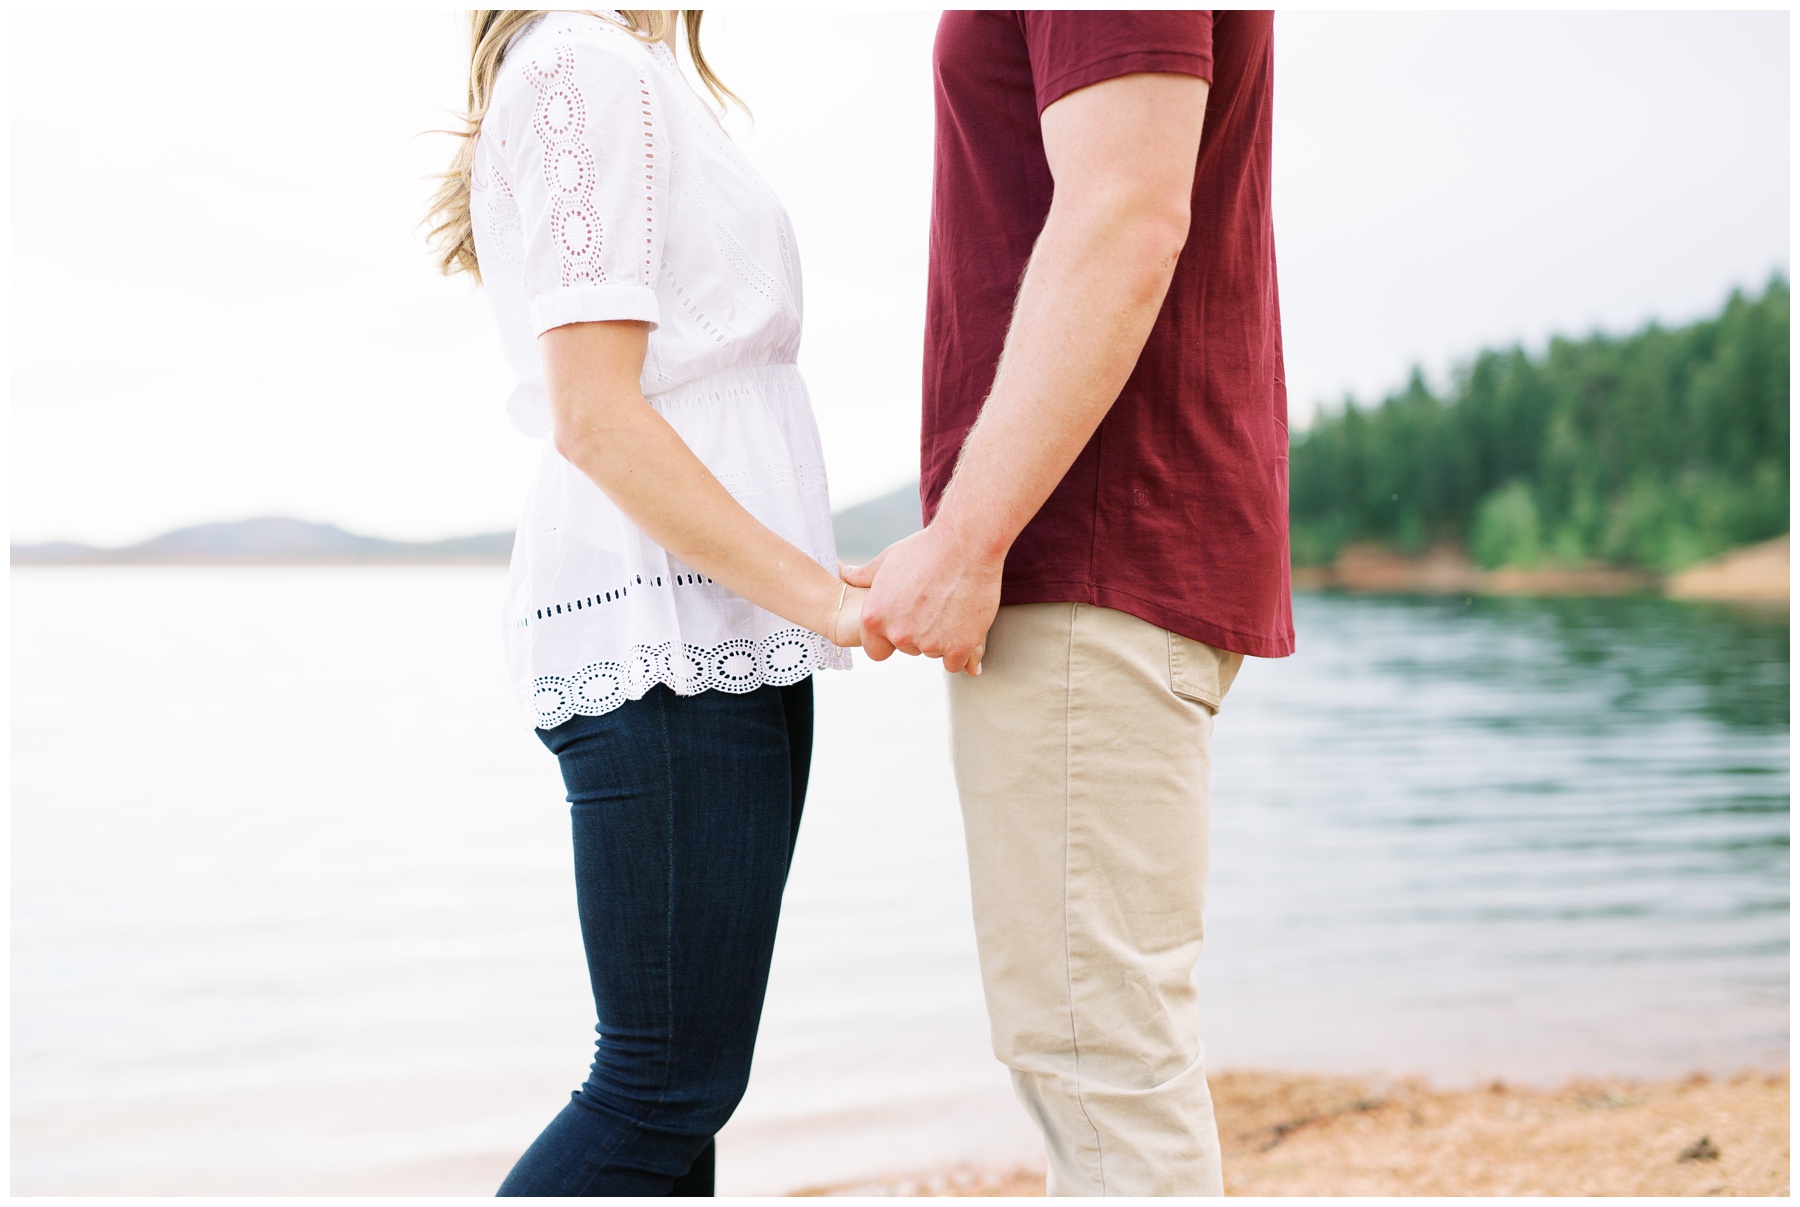 Engagement photo by the water holding hands Colorado | Cat Murphy Photography